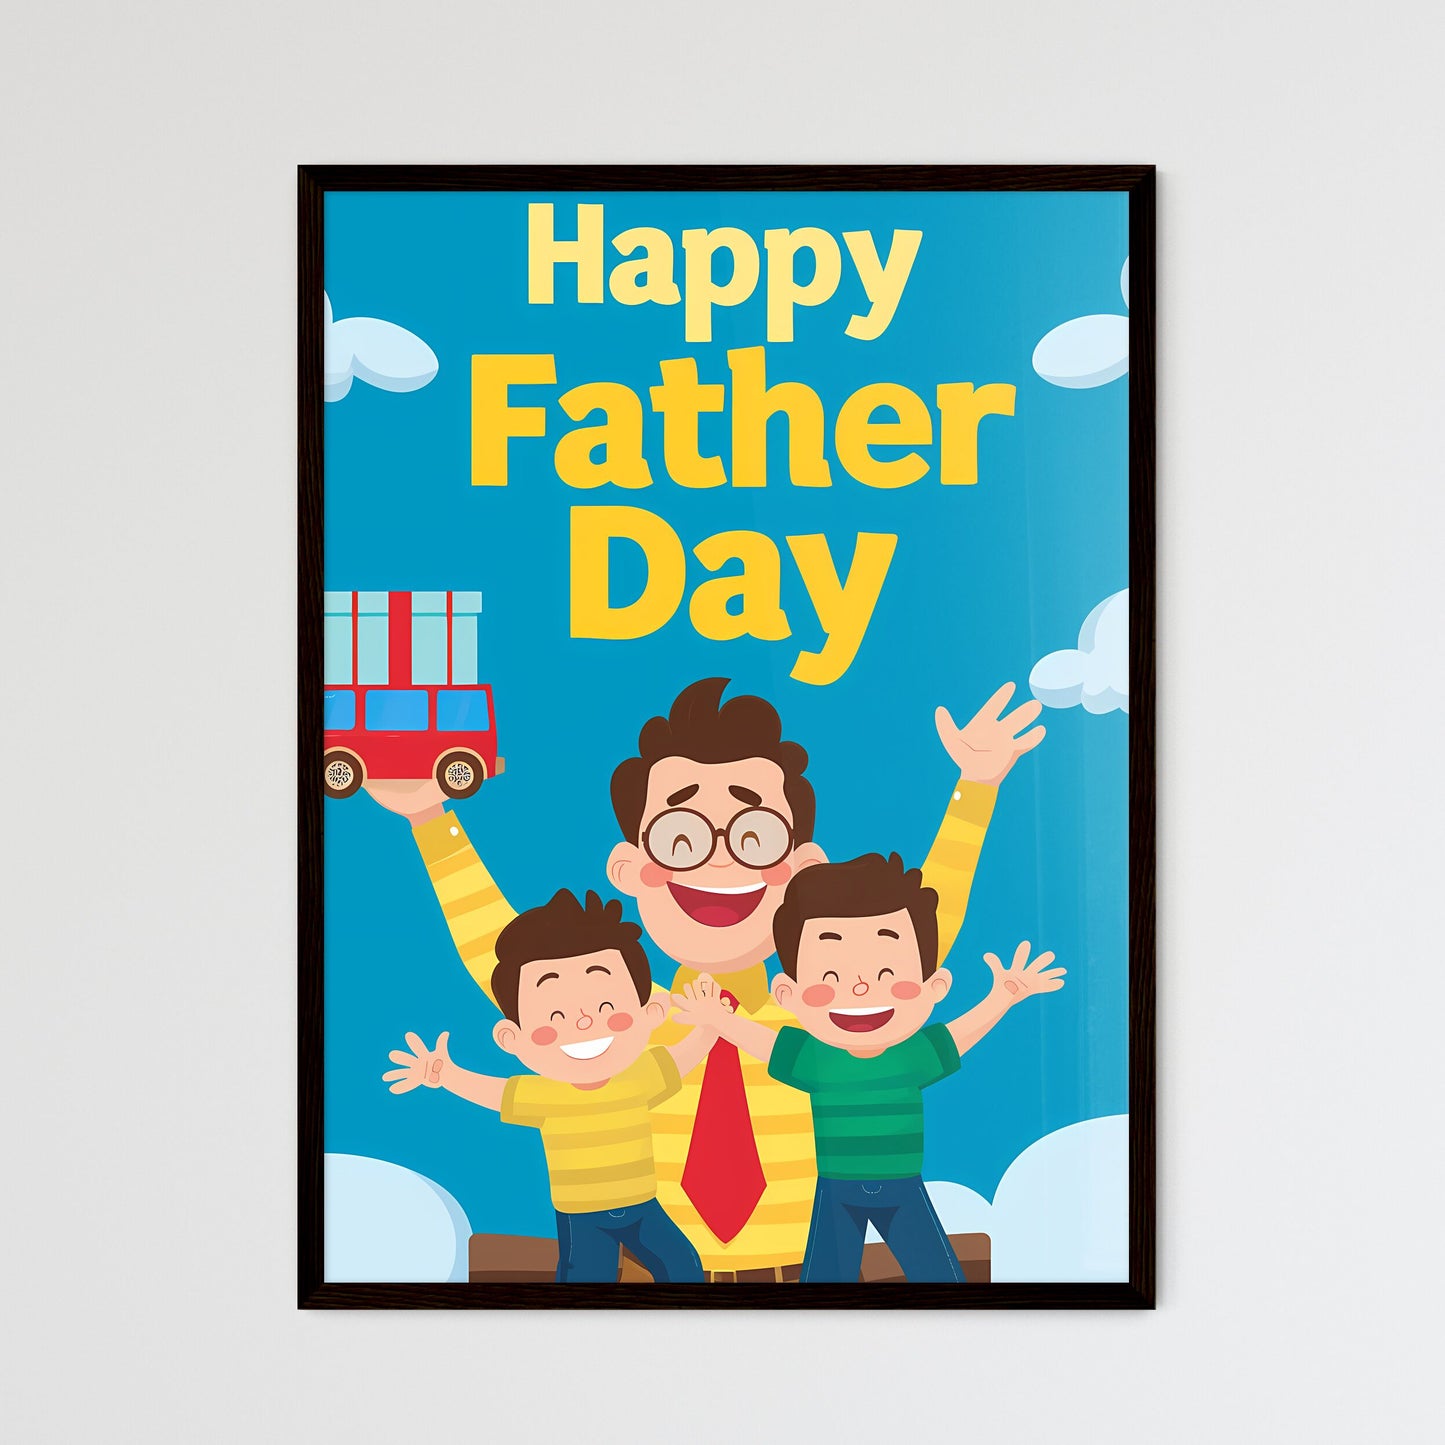 Fathers Day poster,warming feeling,Touching,with text : Happy Fatherâ€™s Day - Art print of a man and two boys holding up their hands Default Title